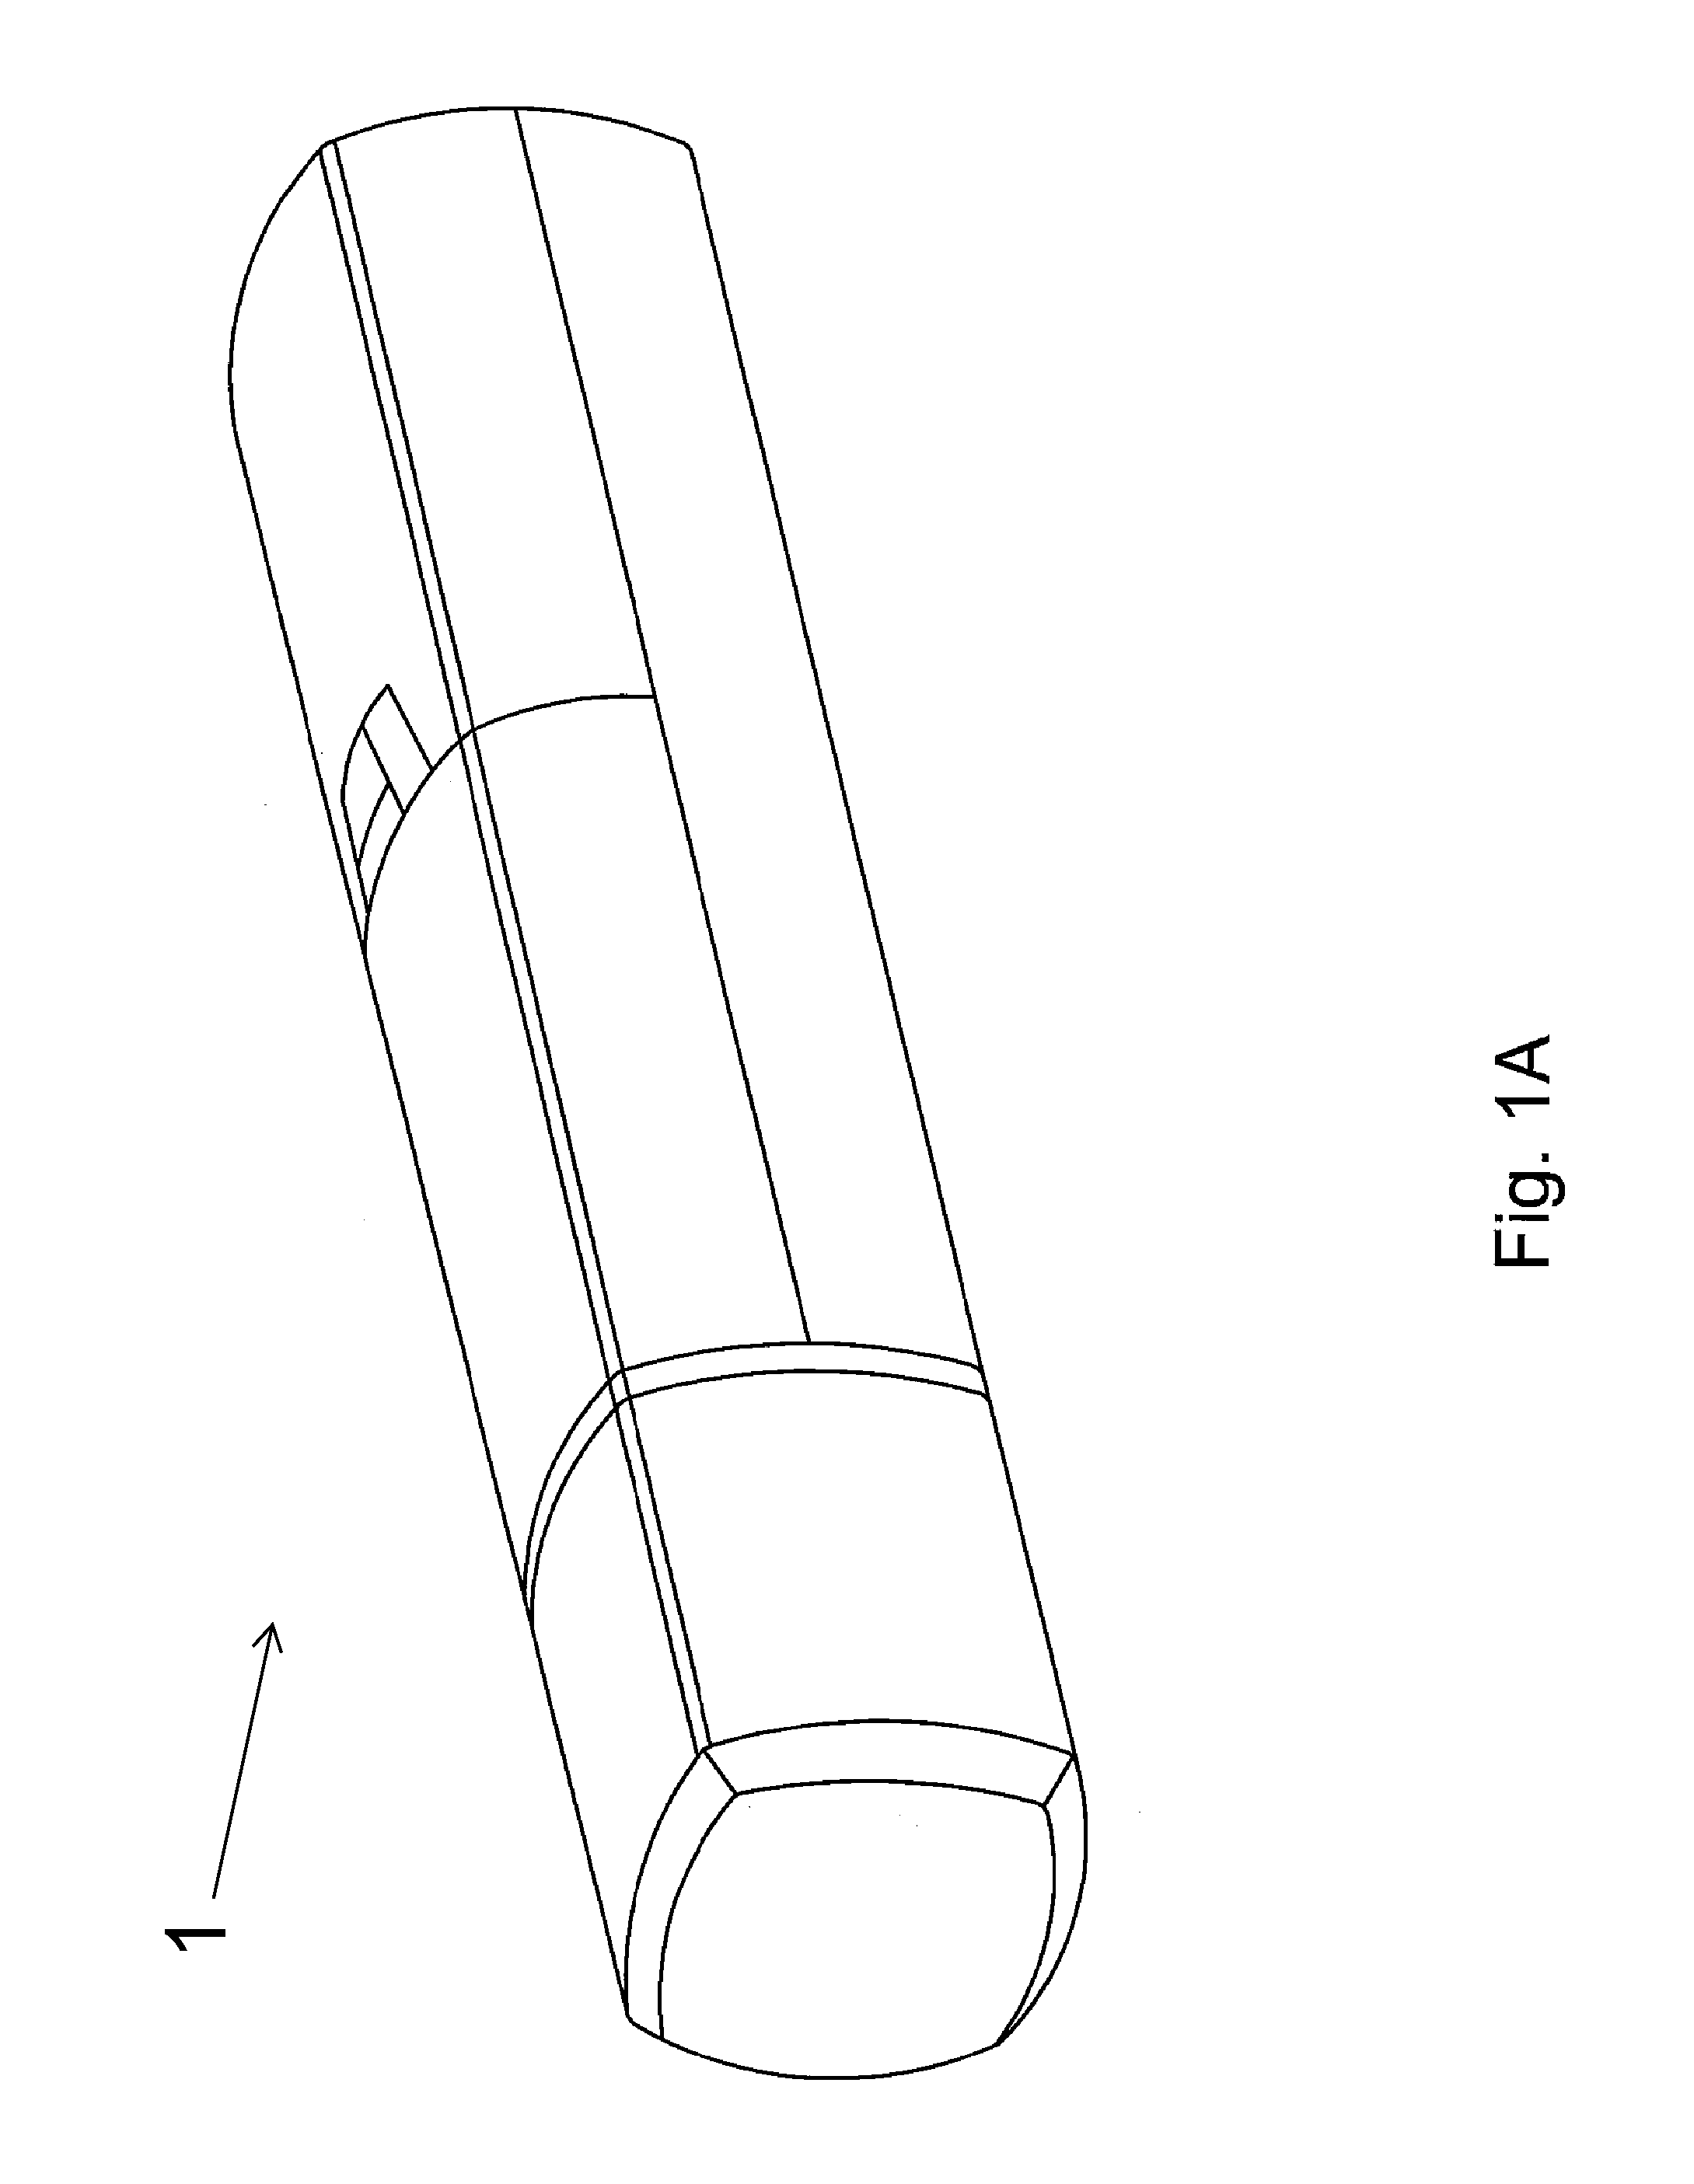 Dissociated discharge EHD sprayer with electric field shield